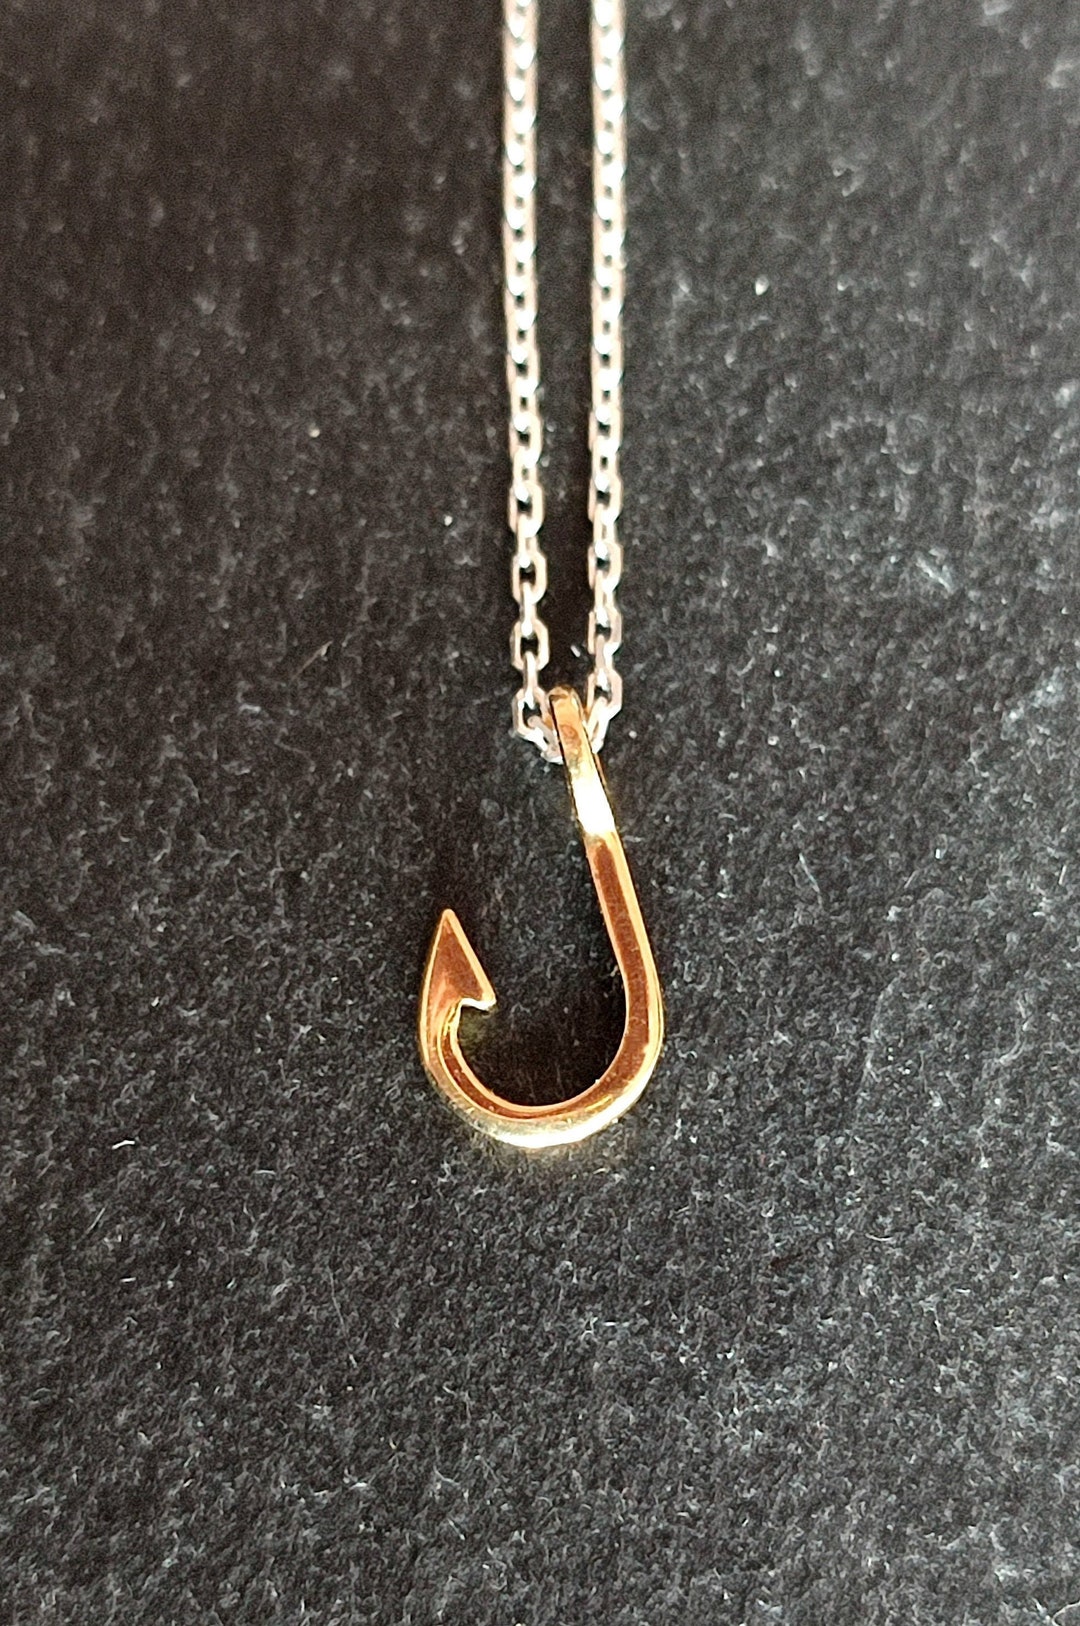 Sterling Silver Large Hawaiian Fish Hook Pendant on a Sterling Silver Chain  -  Canada